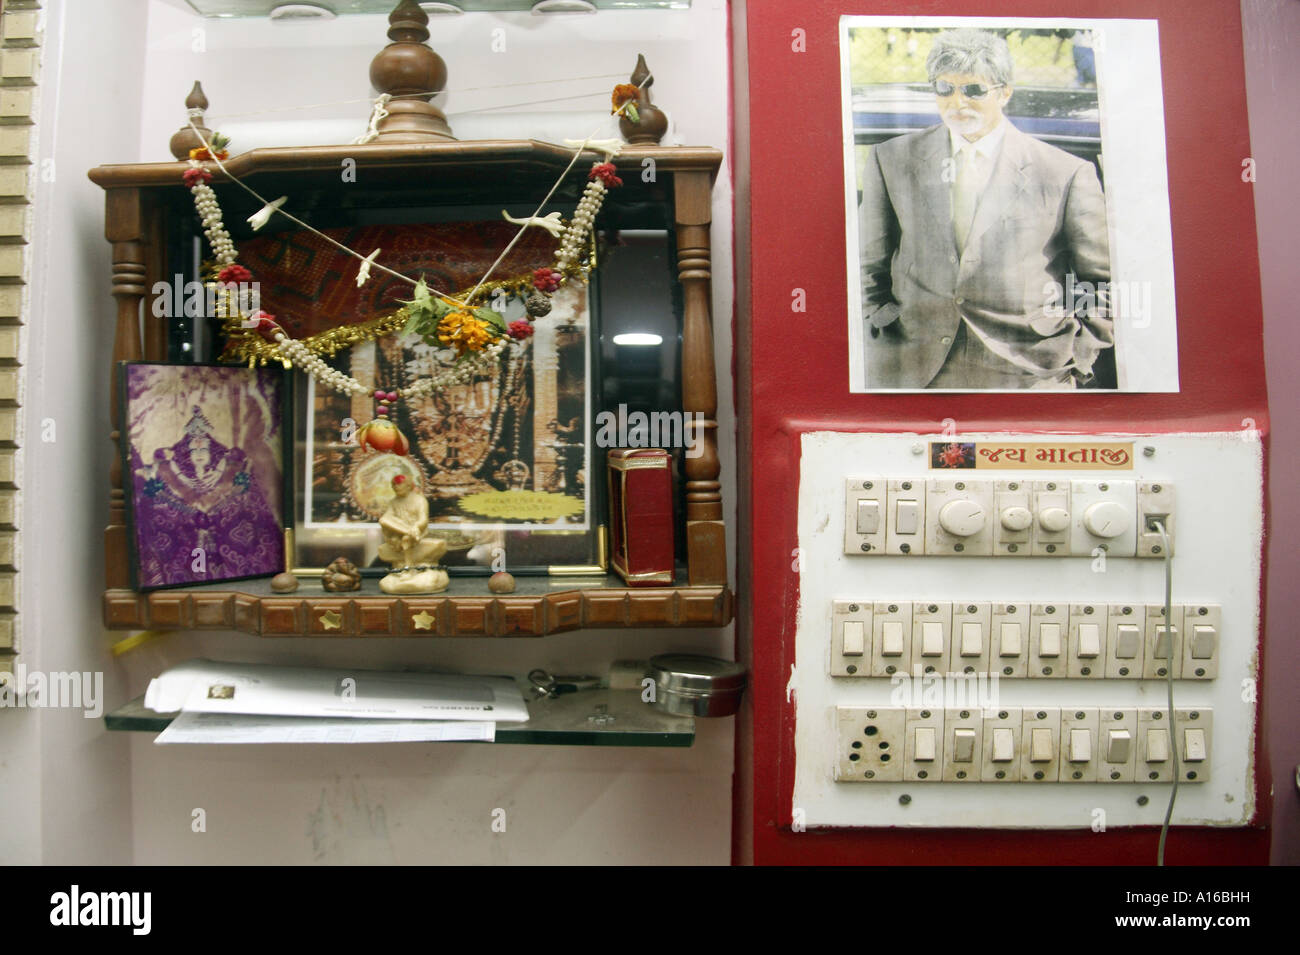 Corner for worship in barber shop with photo of Indian film superstar Amitabh Bachchan Stock Photo